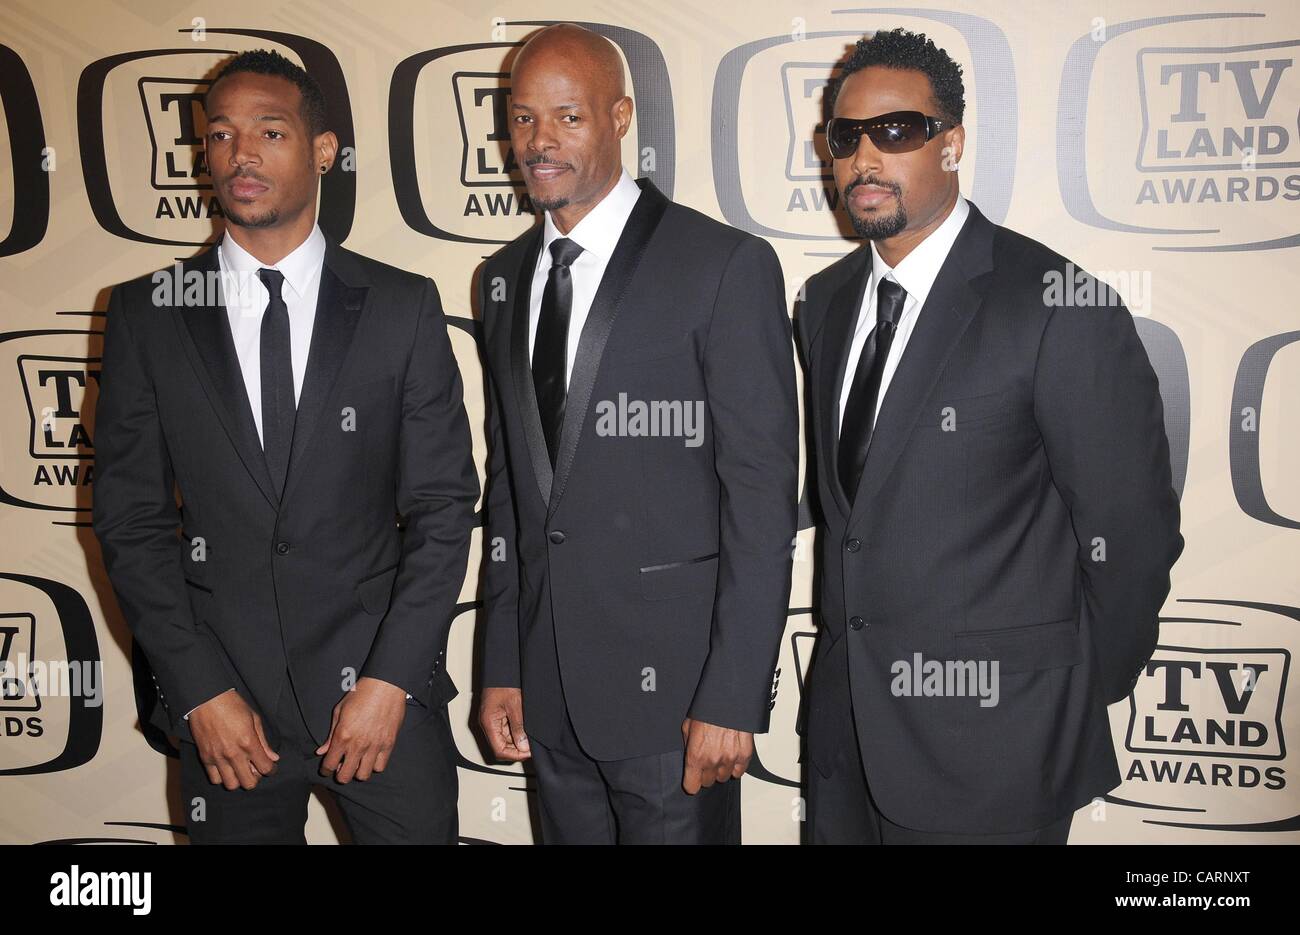 Marlon Wayans, Keenen Ivory Wayans, Shawn Wayans at arrivals for TV Land  Awards 10th Anniversary, Lexington Armory, New York, NY April 14, 2012.  Photo By: Kristin Callahan/Everett Collection Stock Photo - Alamy